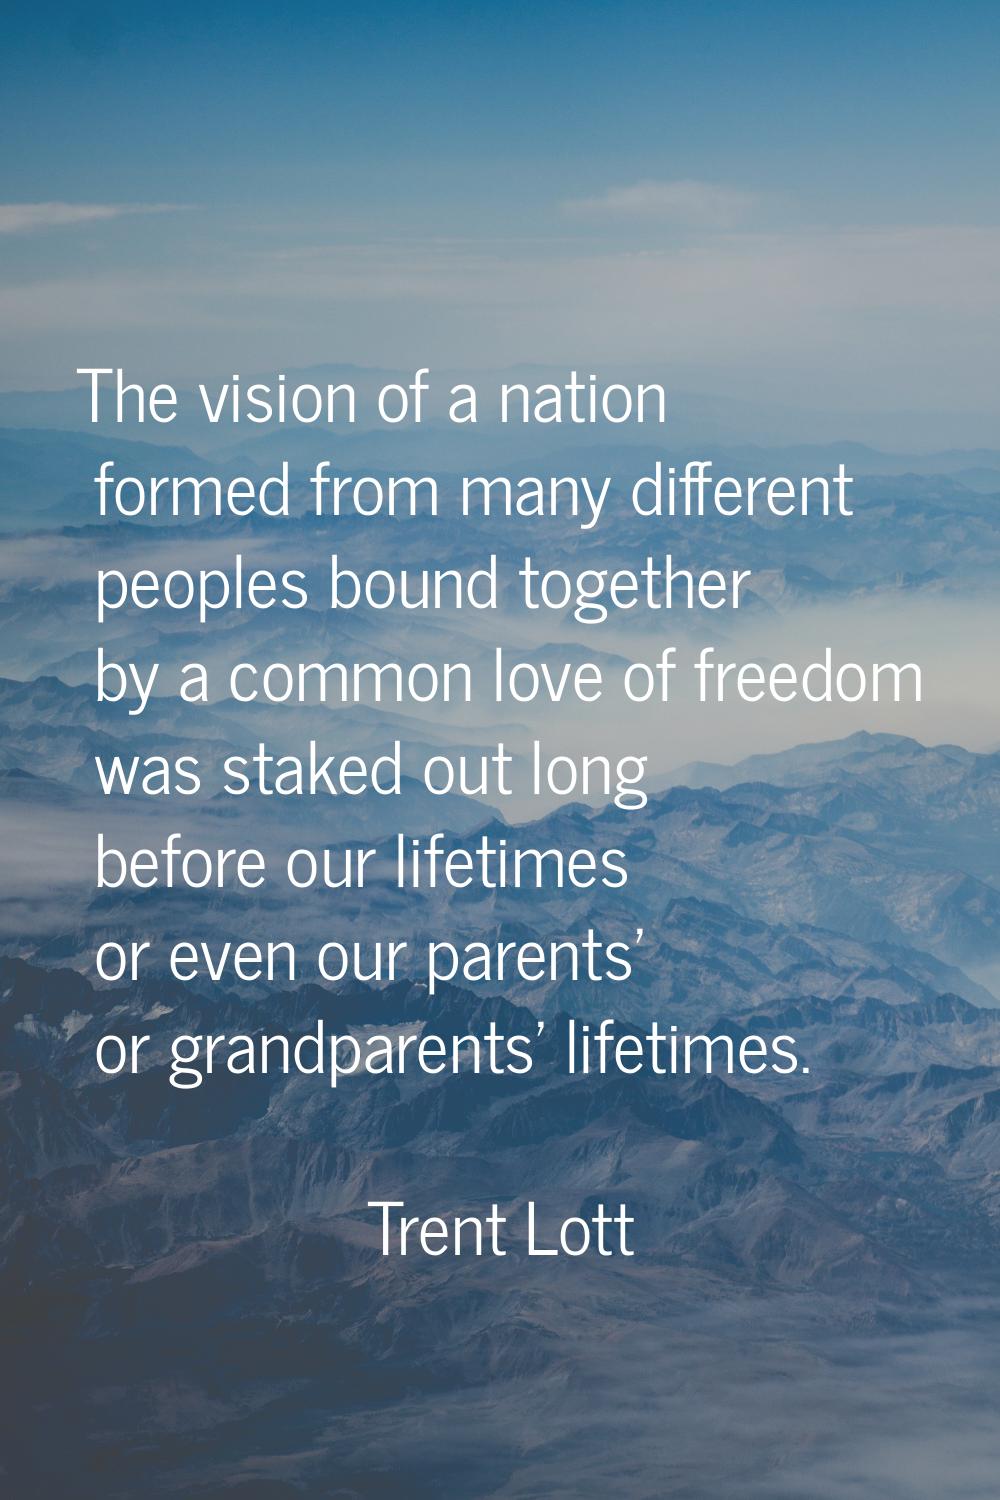 The vision of a nation formed from many different peoples bound together by a common love of freedo